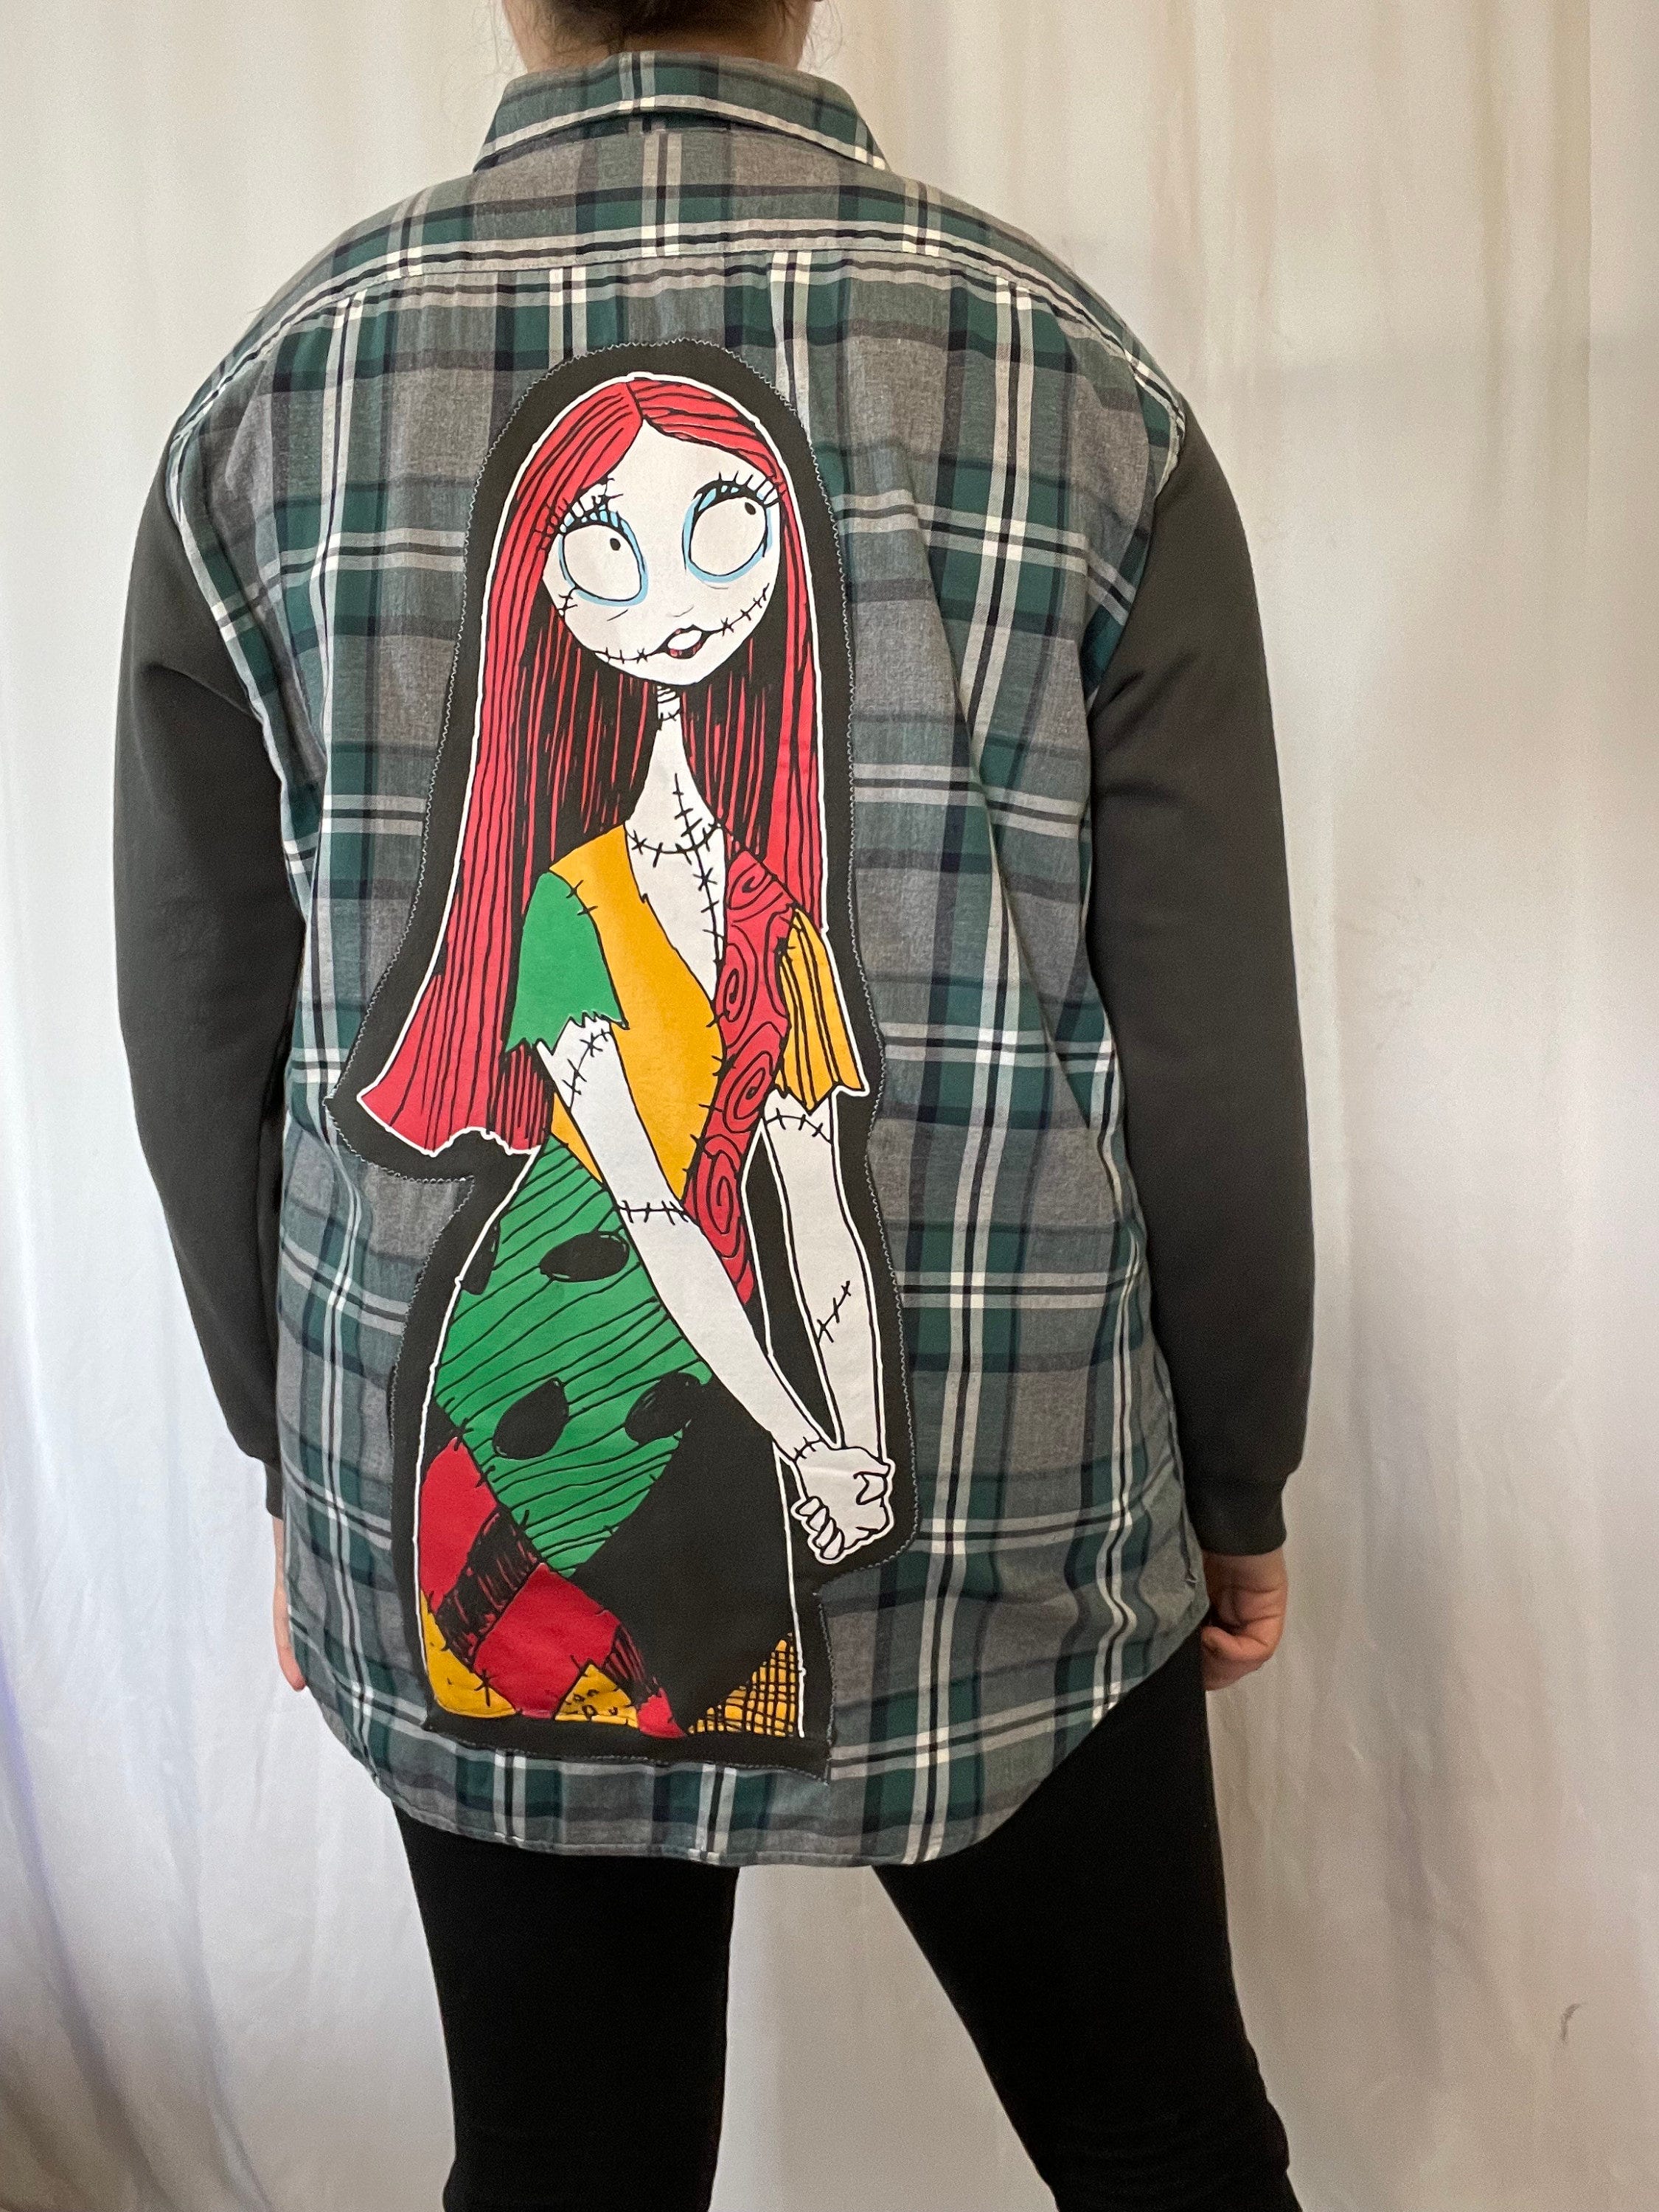 Nightmare before Christmas Upcycled Long Sleeve Flannel Sweatshirt Hybrid Button Down Shirt unisex Size L/ XL  Grey Green Plaid 1 of a kind